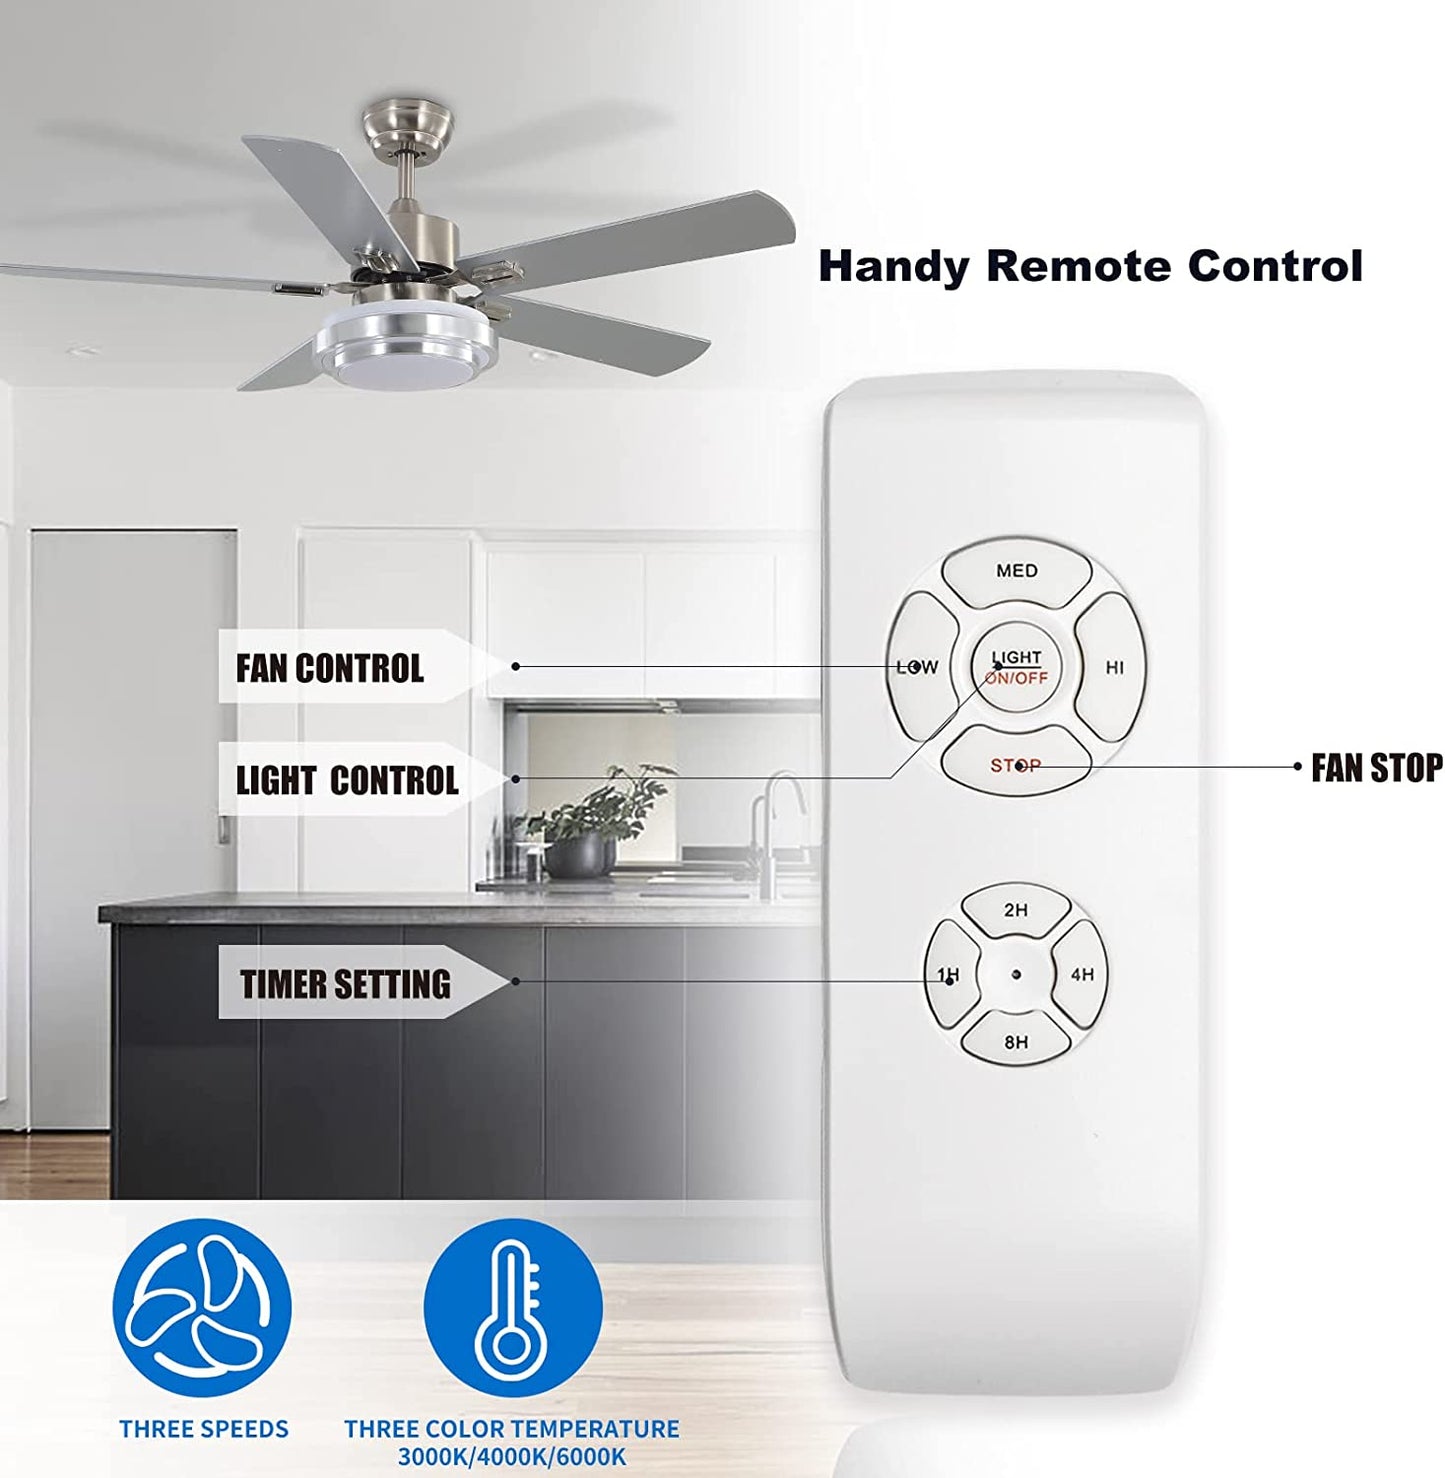 warmiplanet Ceiling Fan with Lights Remote Control, 52 Inch, Brushed Nickel (5-Blades)